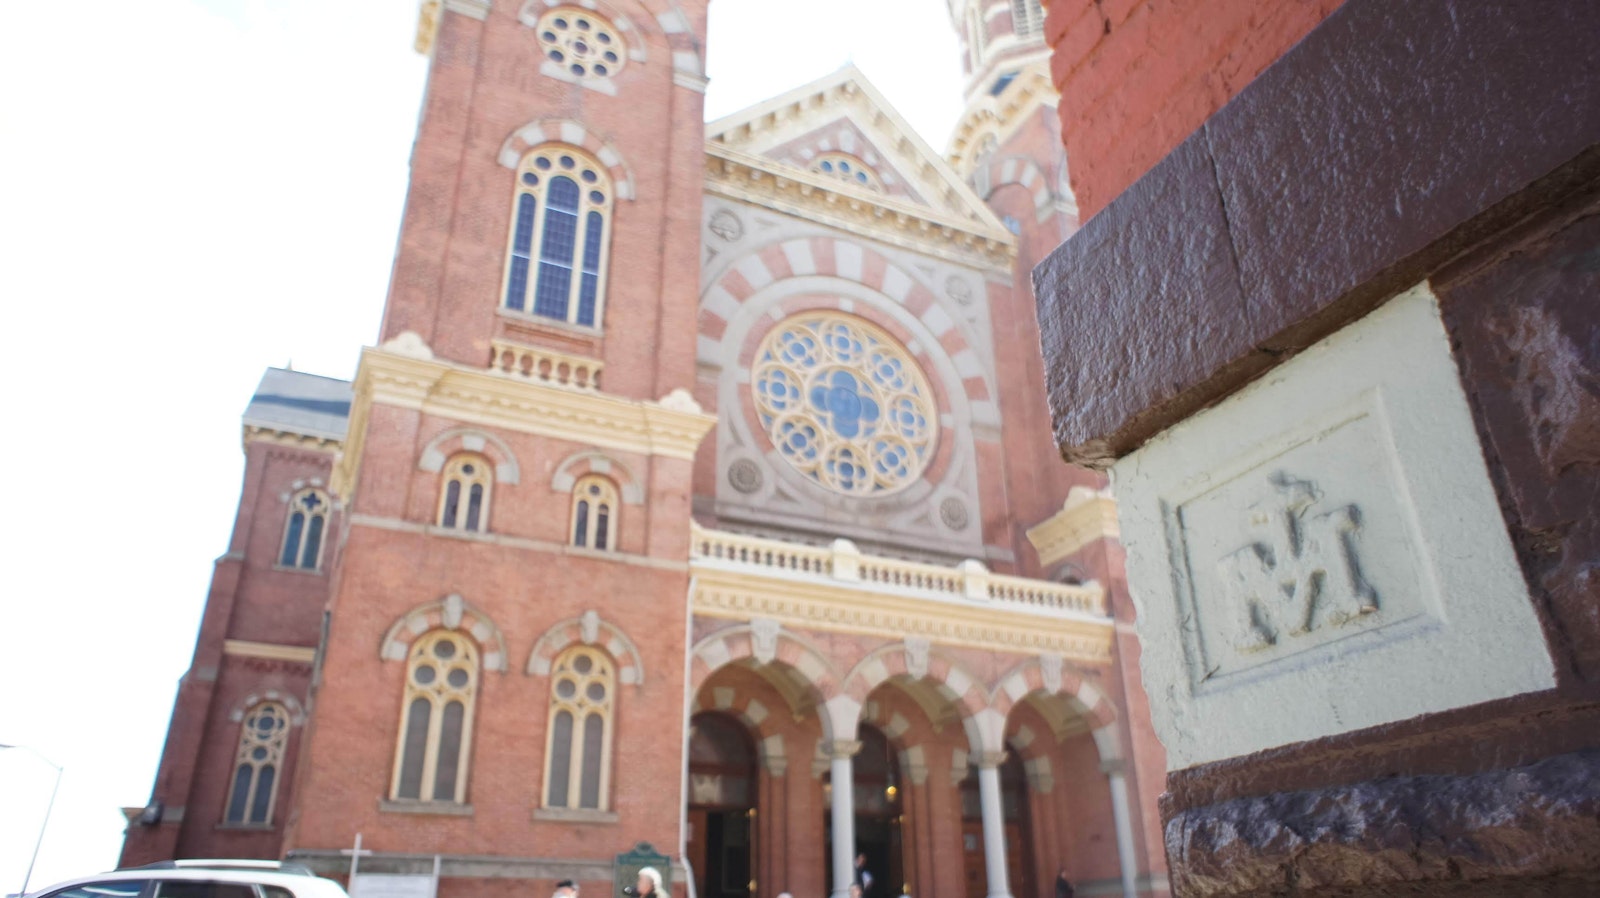 Part of engagement is using each parish's strength to attract and welcome visitors. In the case of parishes such as Old St. Mary's in Greektown, that includes unique and breathtaking historical architecture.